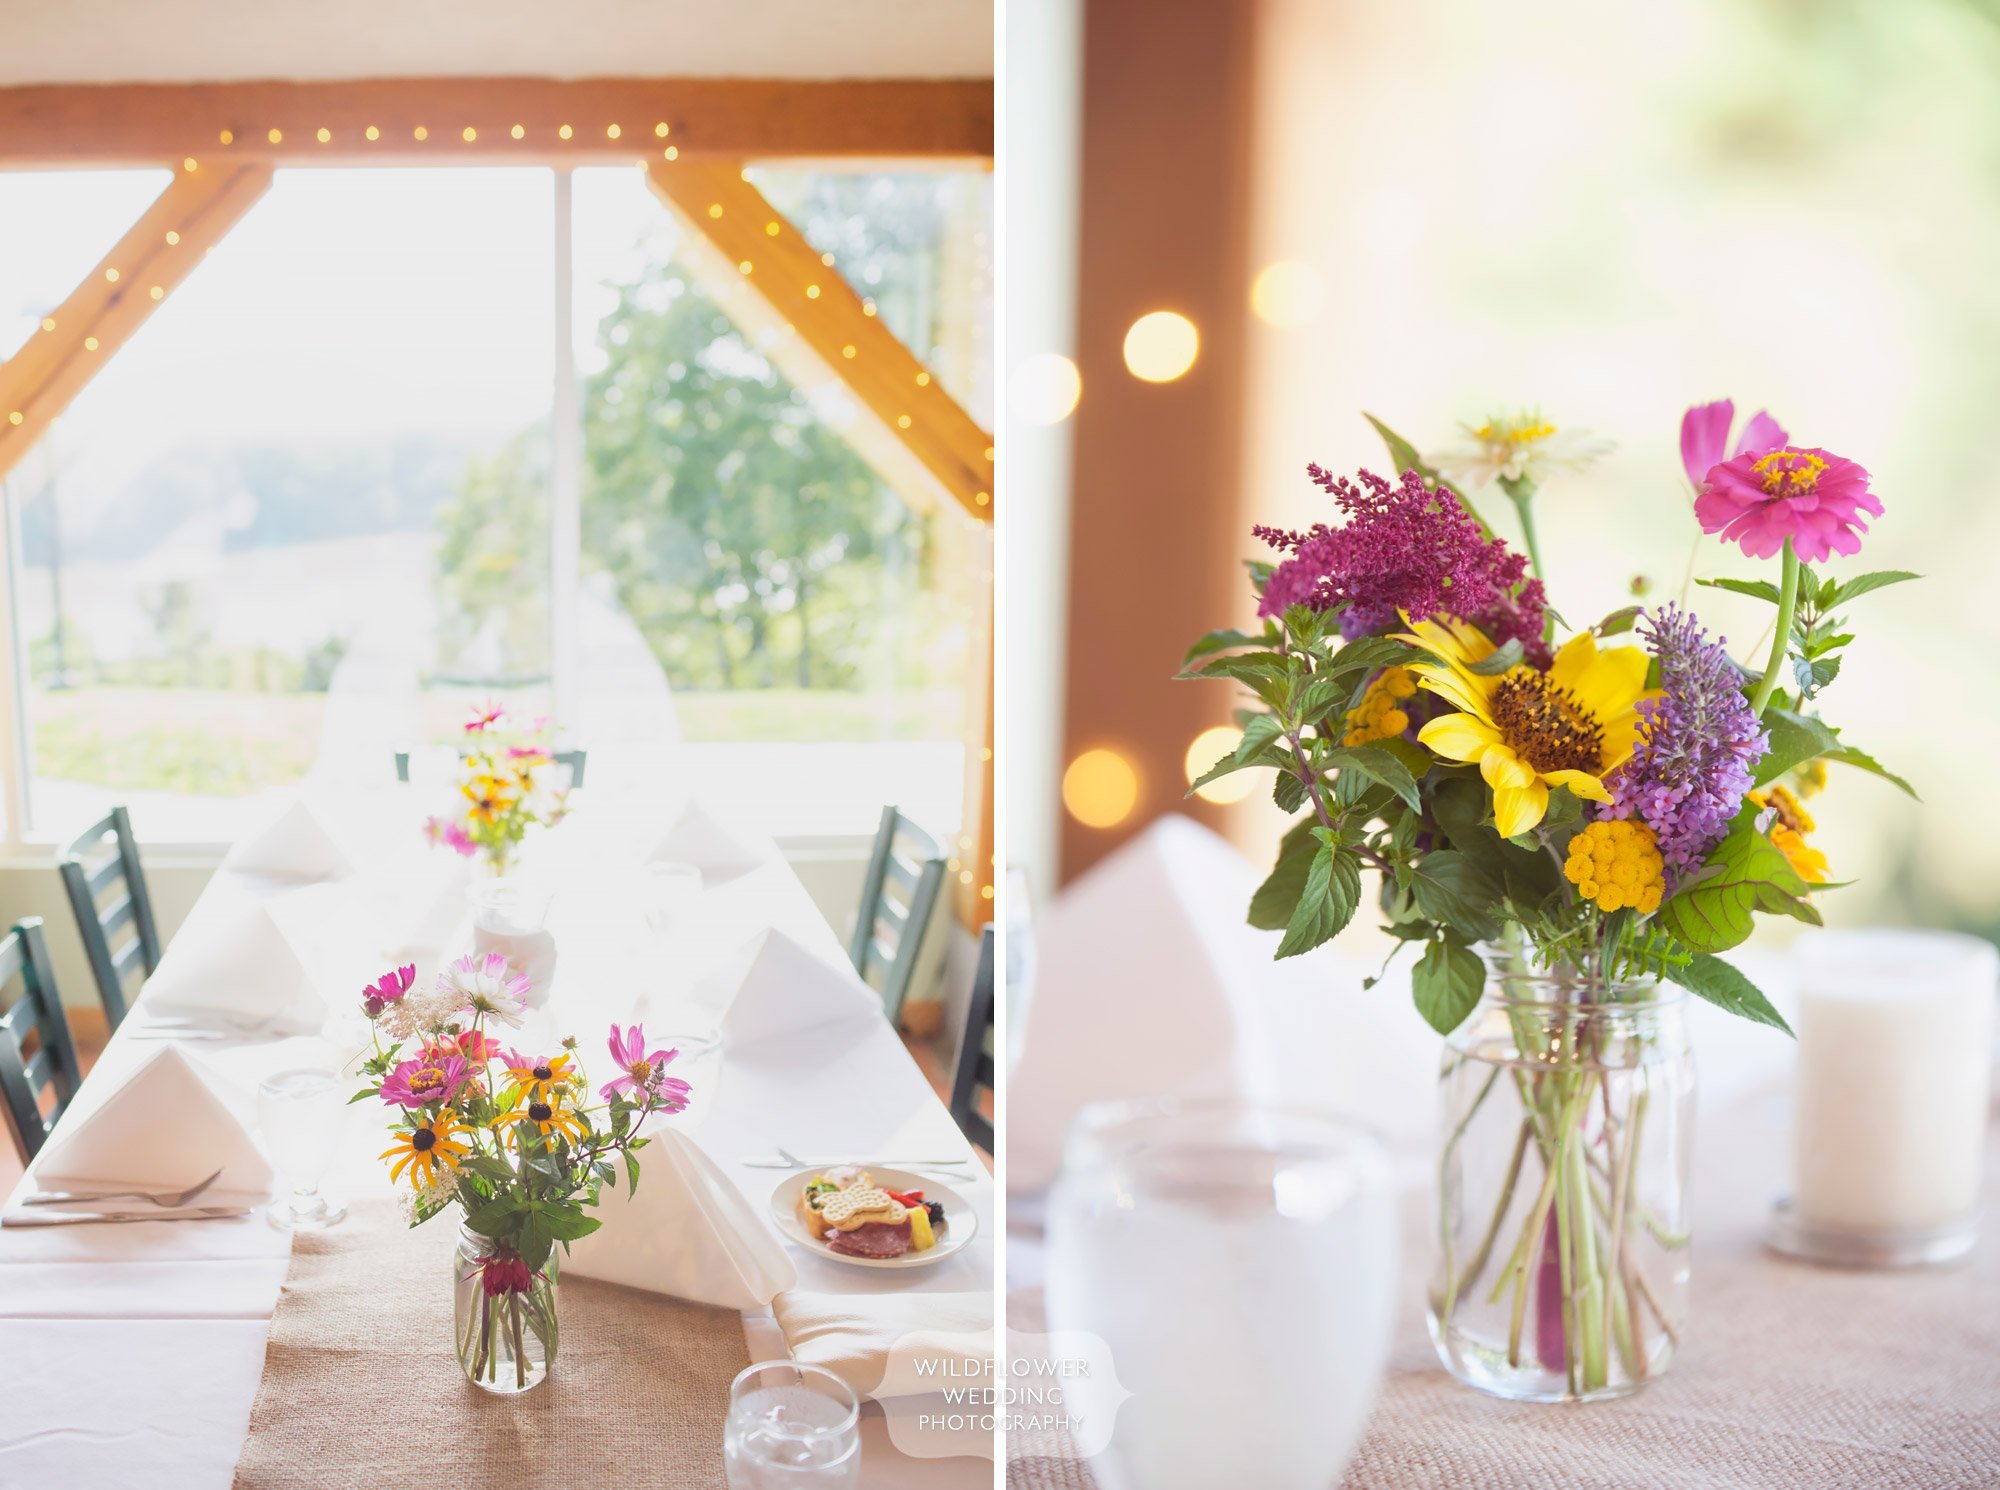 Colorful wildflower bouquets as table centerpieces at this Les Bourgeois Winery wedding in July in MO.